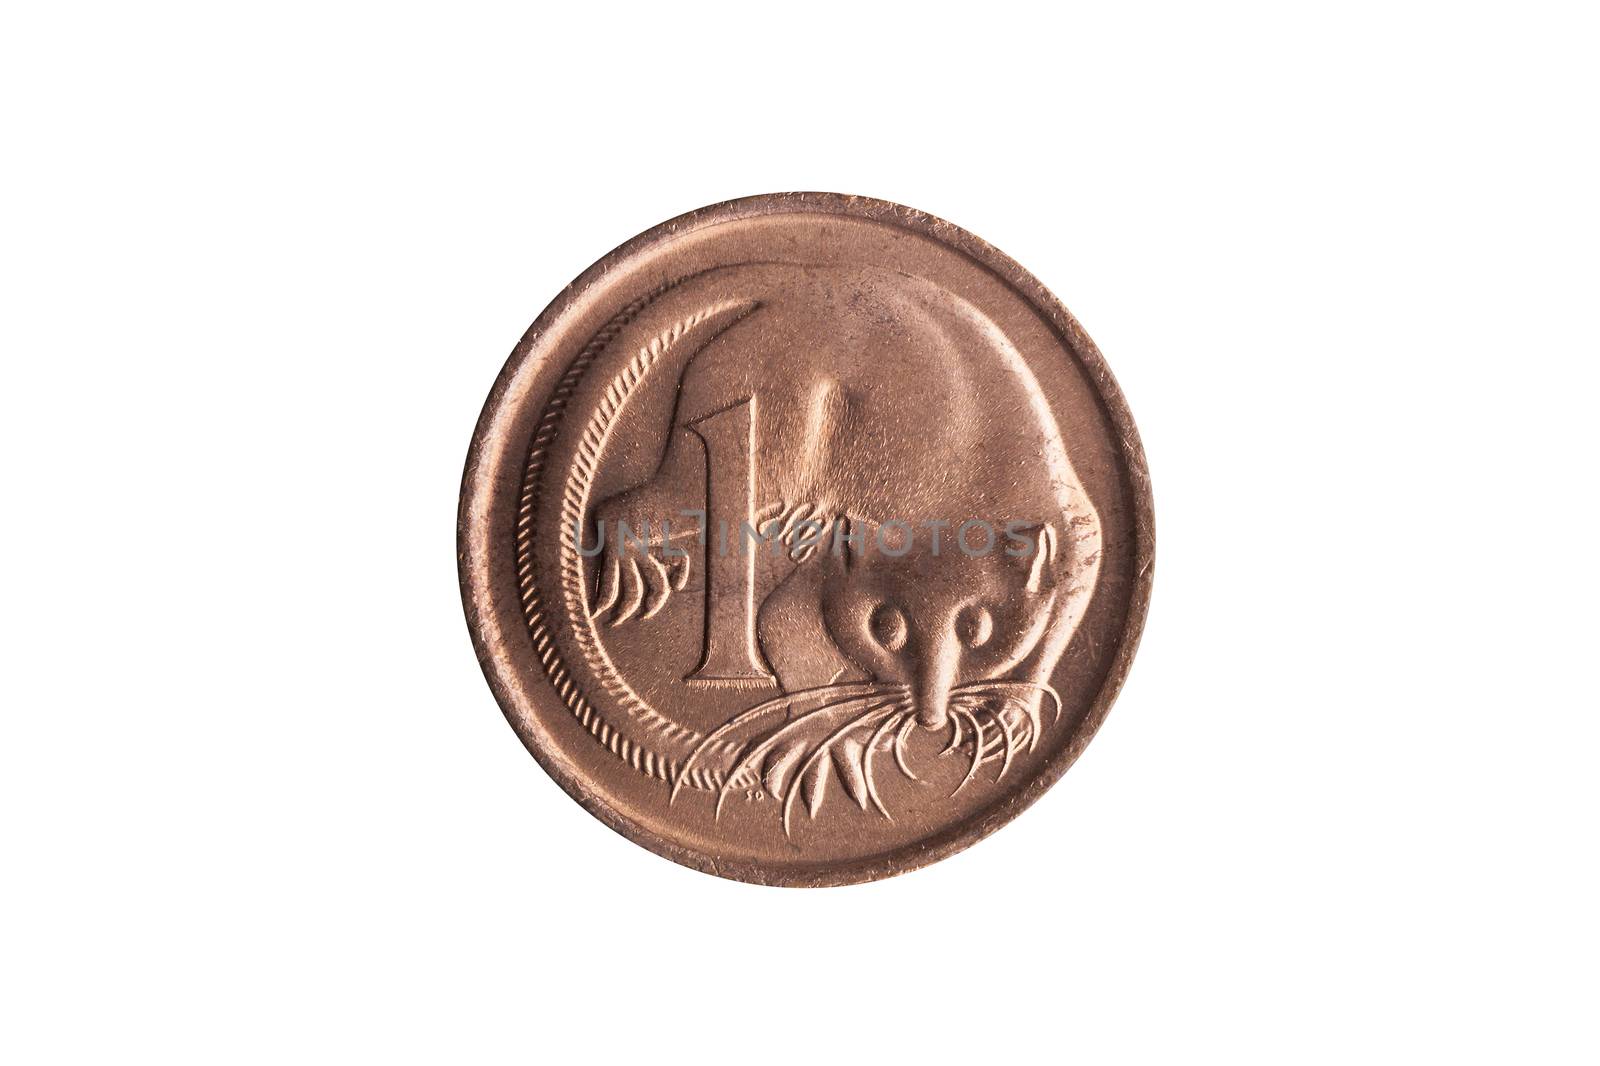 Australia one cent penny coin with an image of a Feathertail Gli by ant